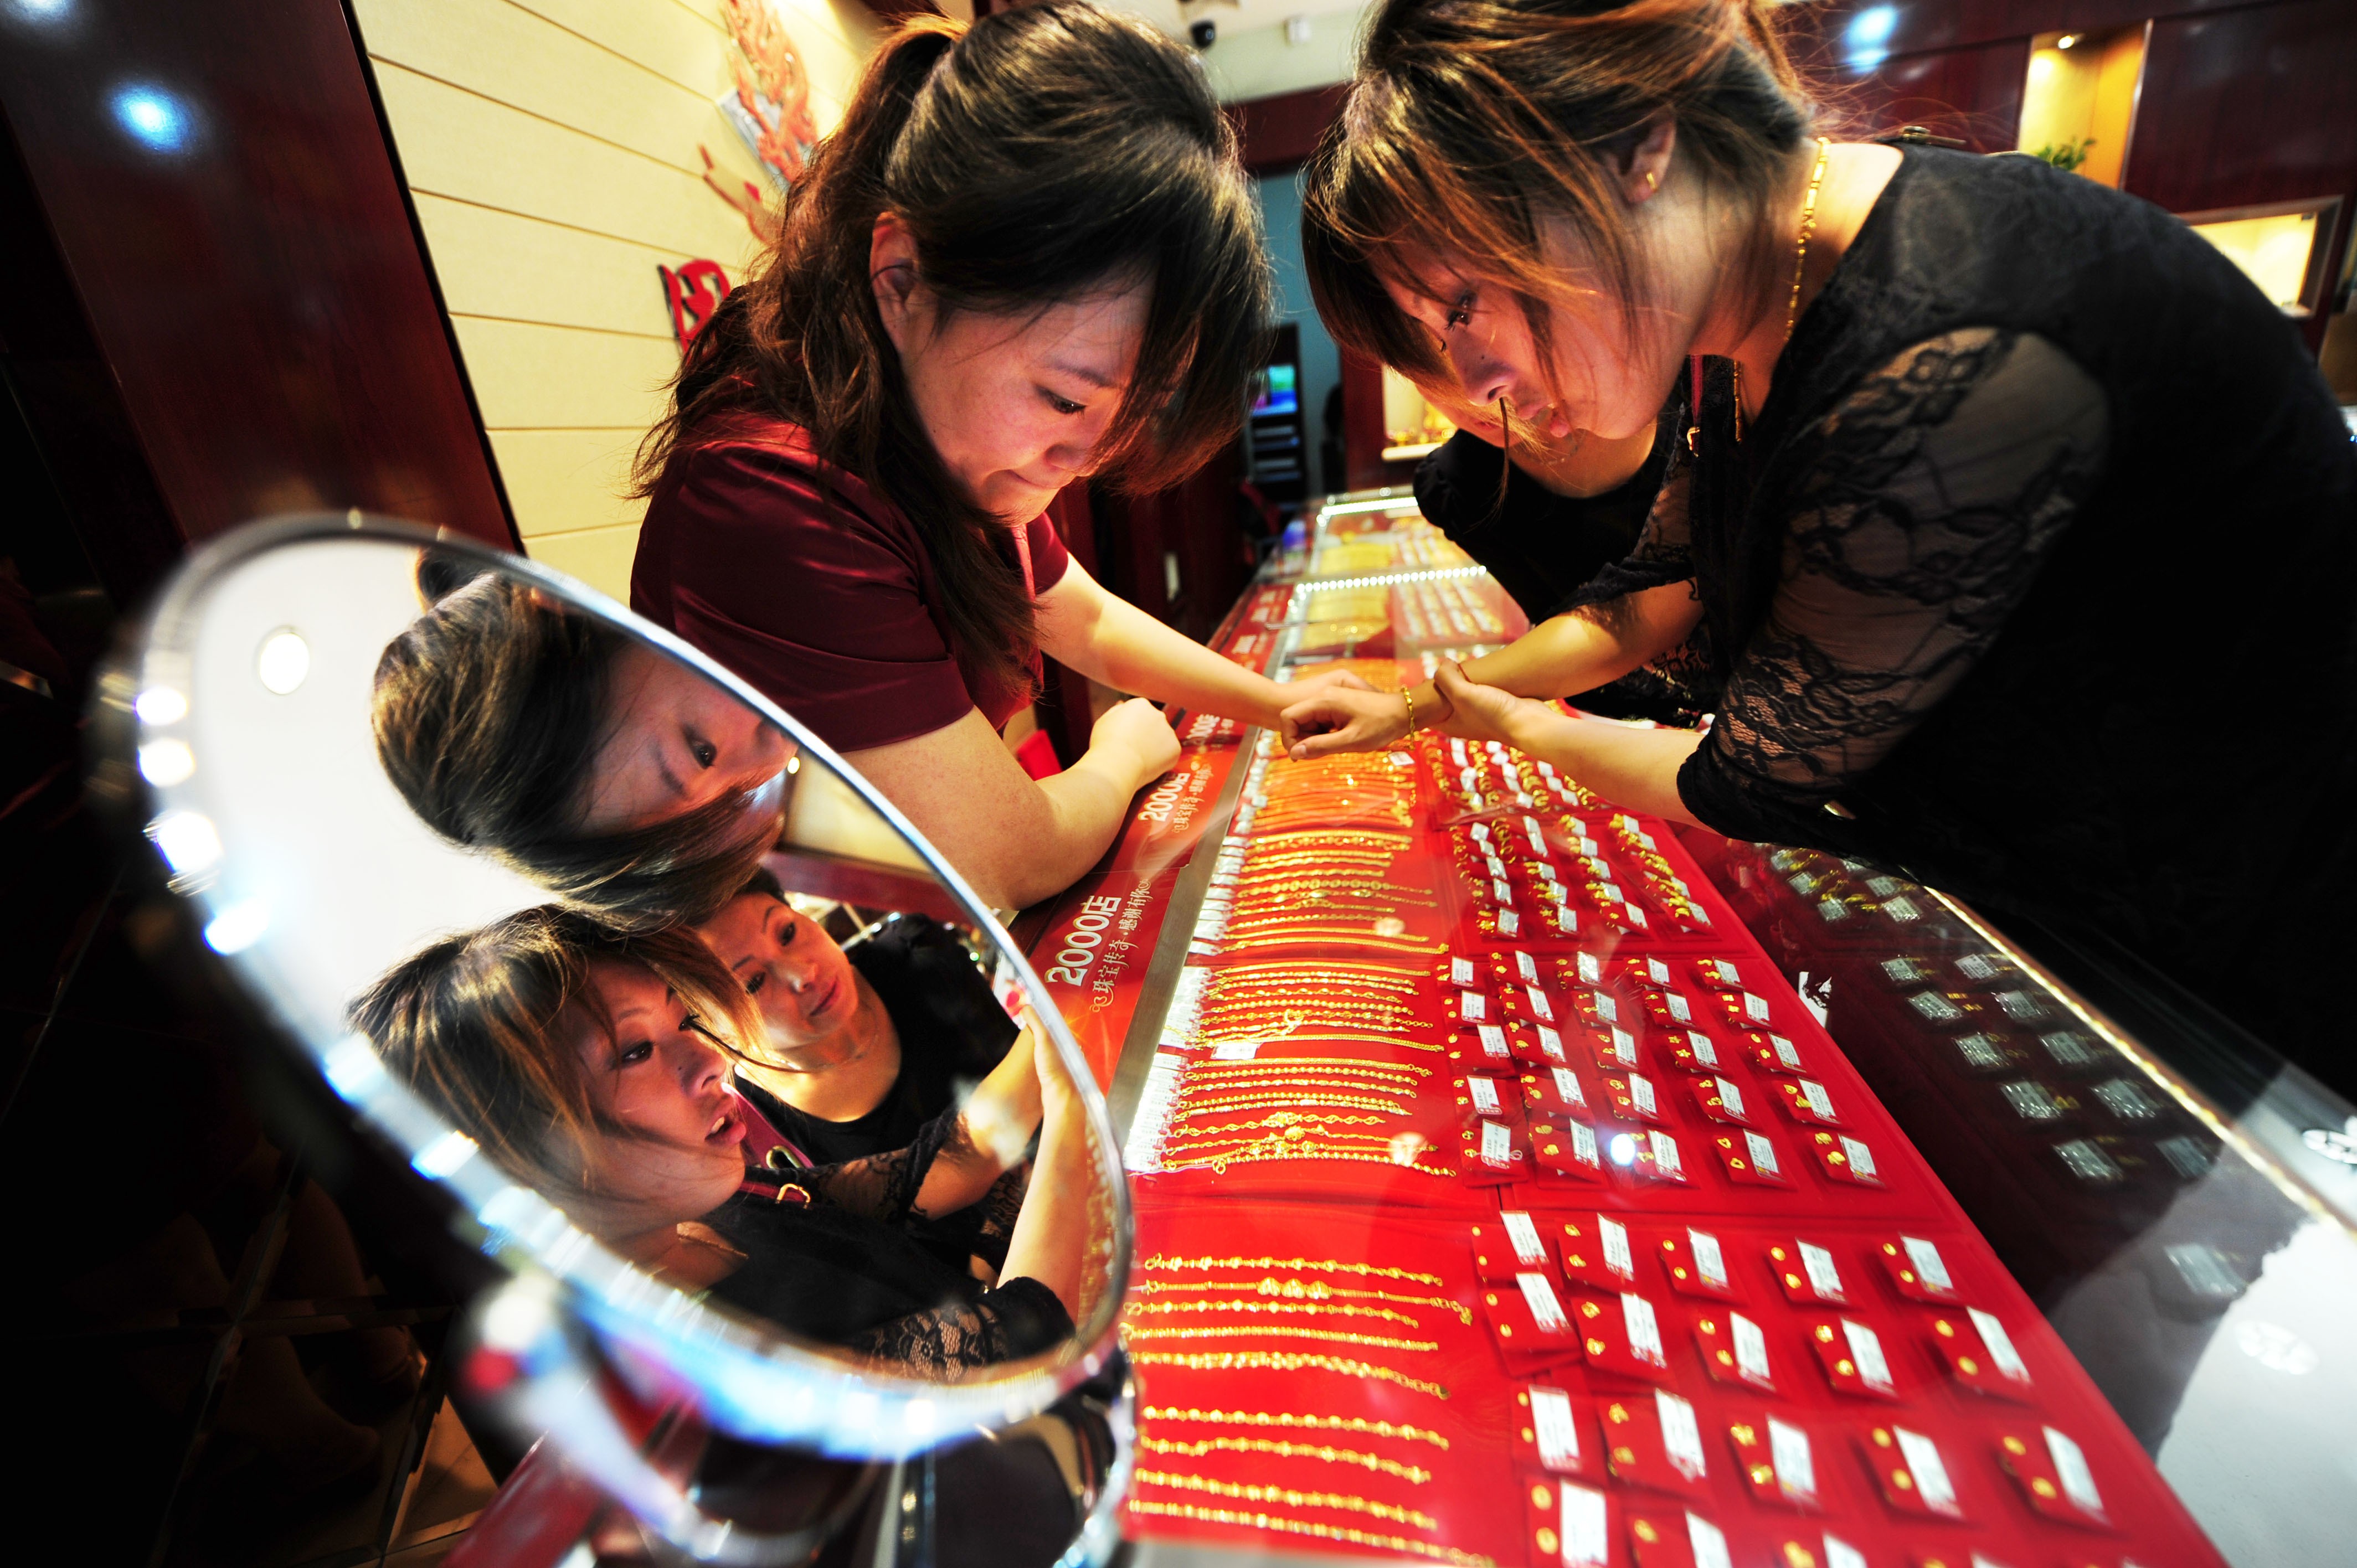 Women shop for jewellery at a shop in Yantai, east China’s Shandong Province. Photo: Xinhua